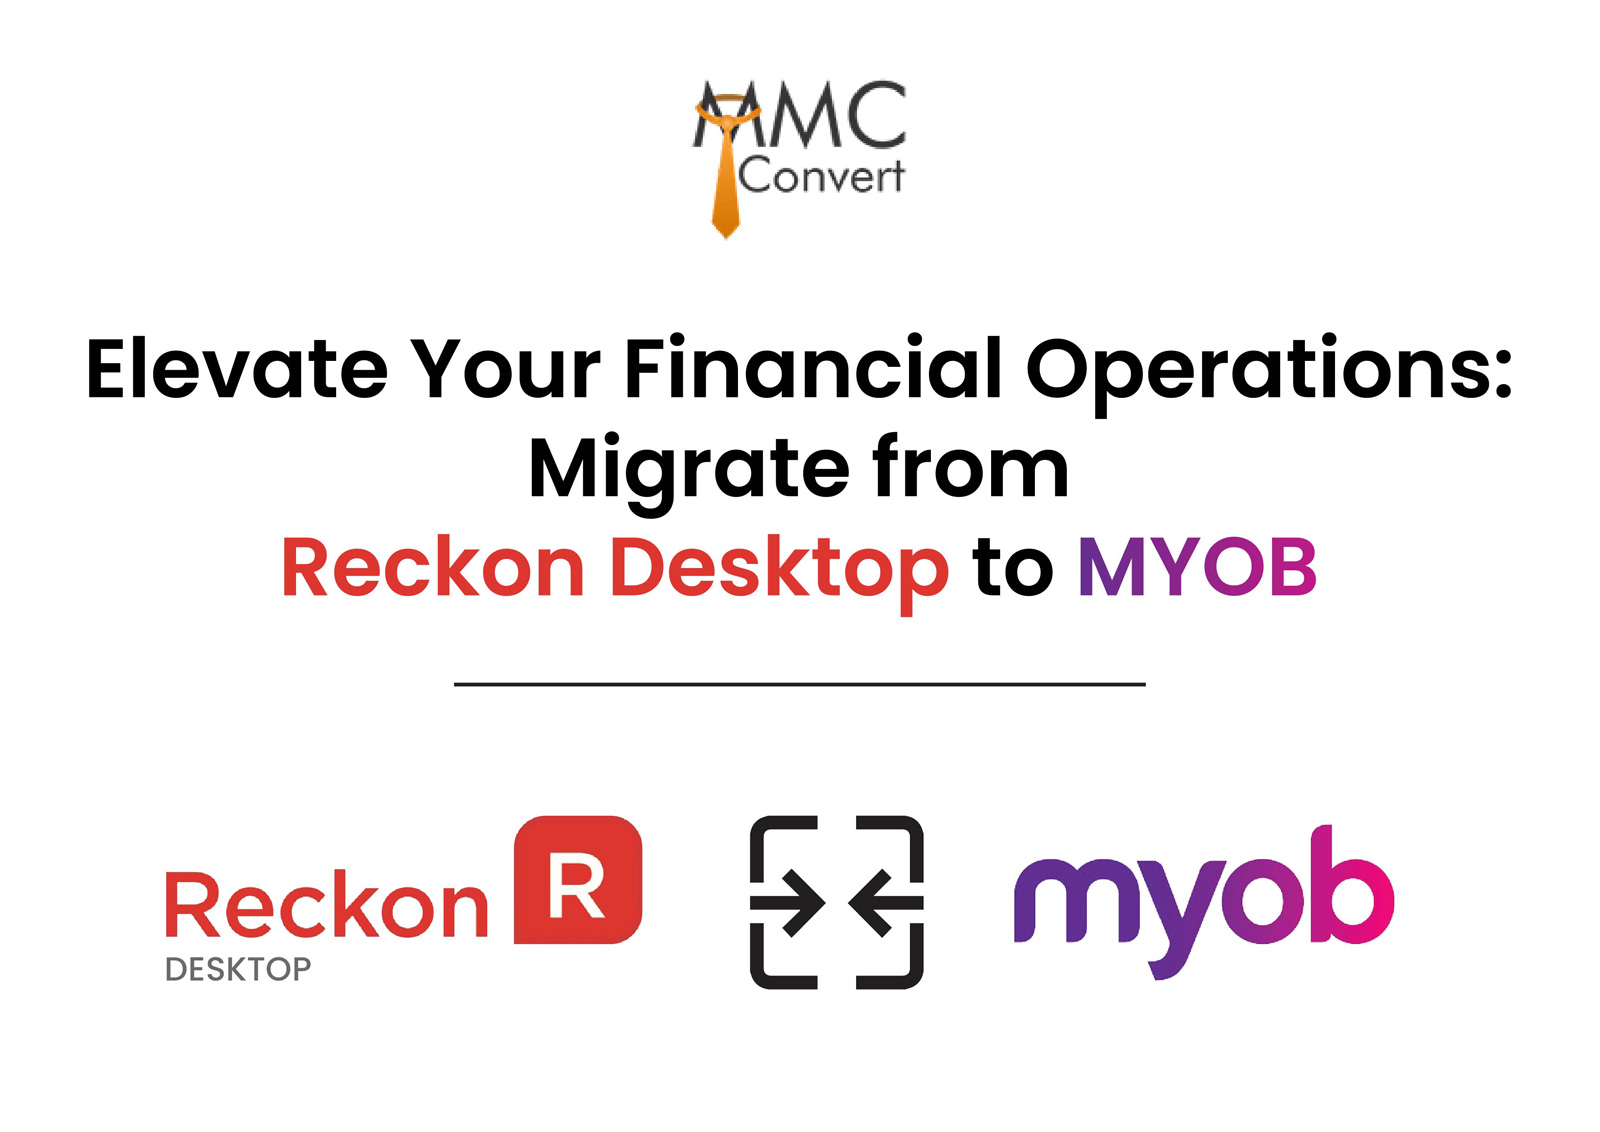 Elevate Your Financial Operations: Migrate from Reckon Desktop to MYOB